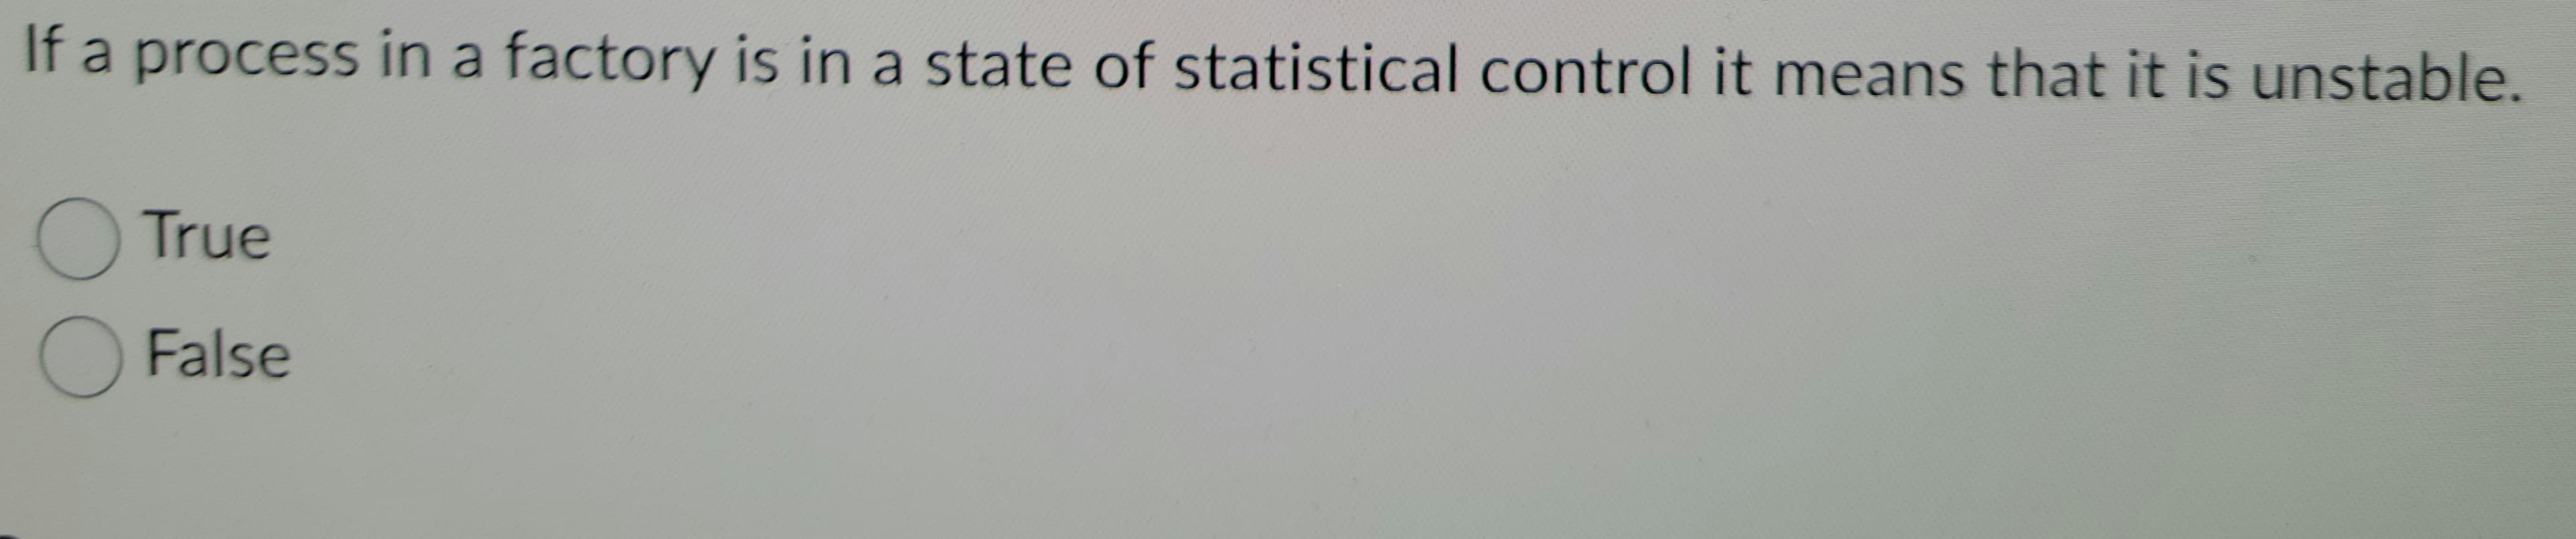 If a process in a factory is in a state of statistical control it means that it is unstable.
True
OFalse
